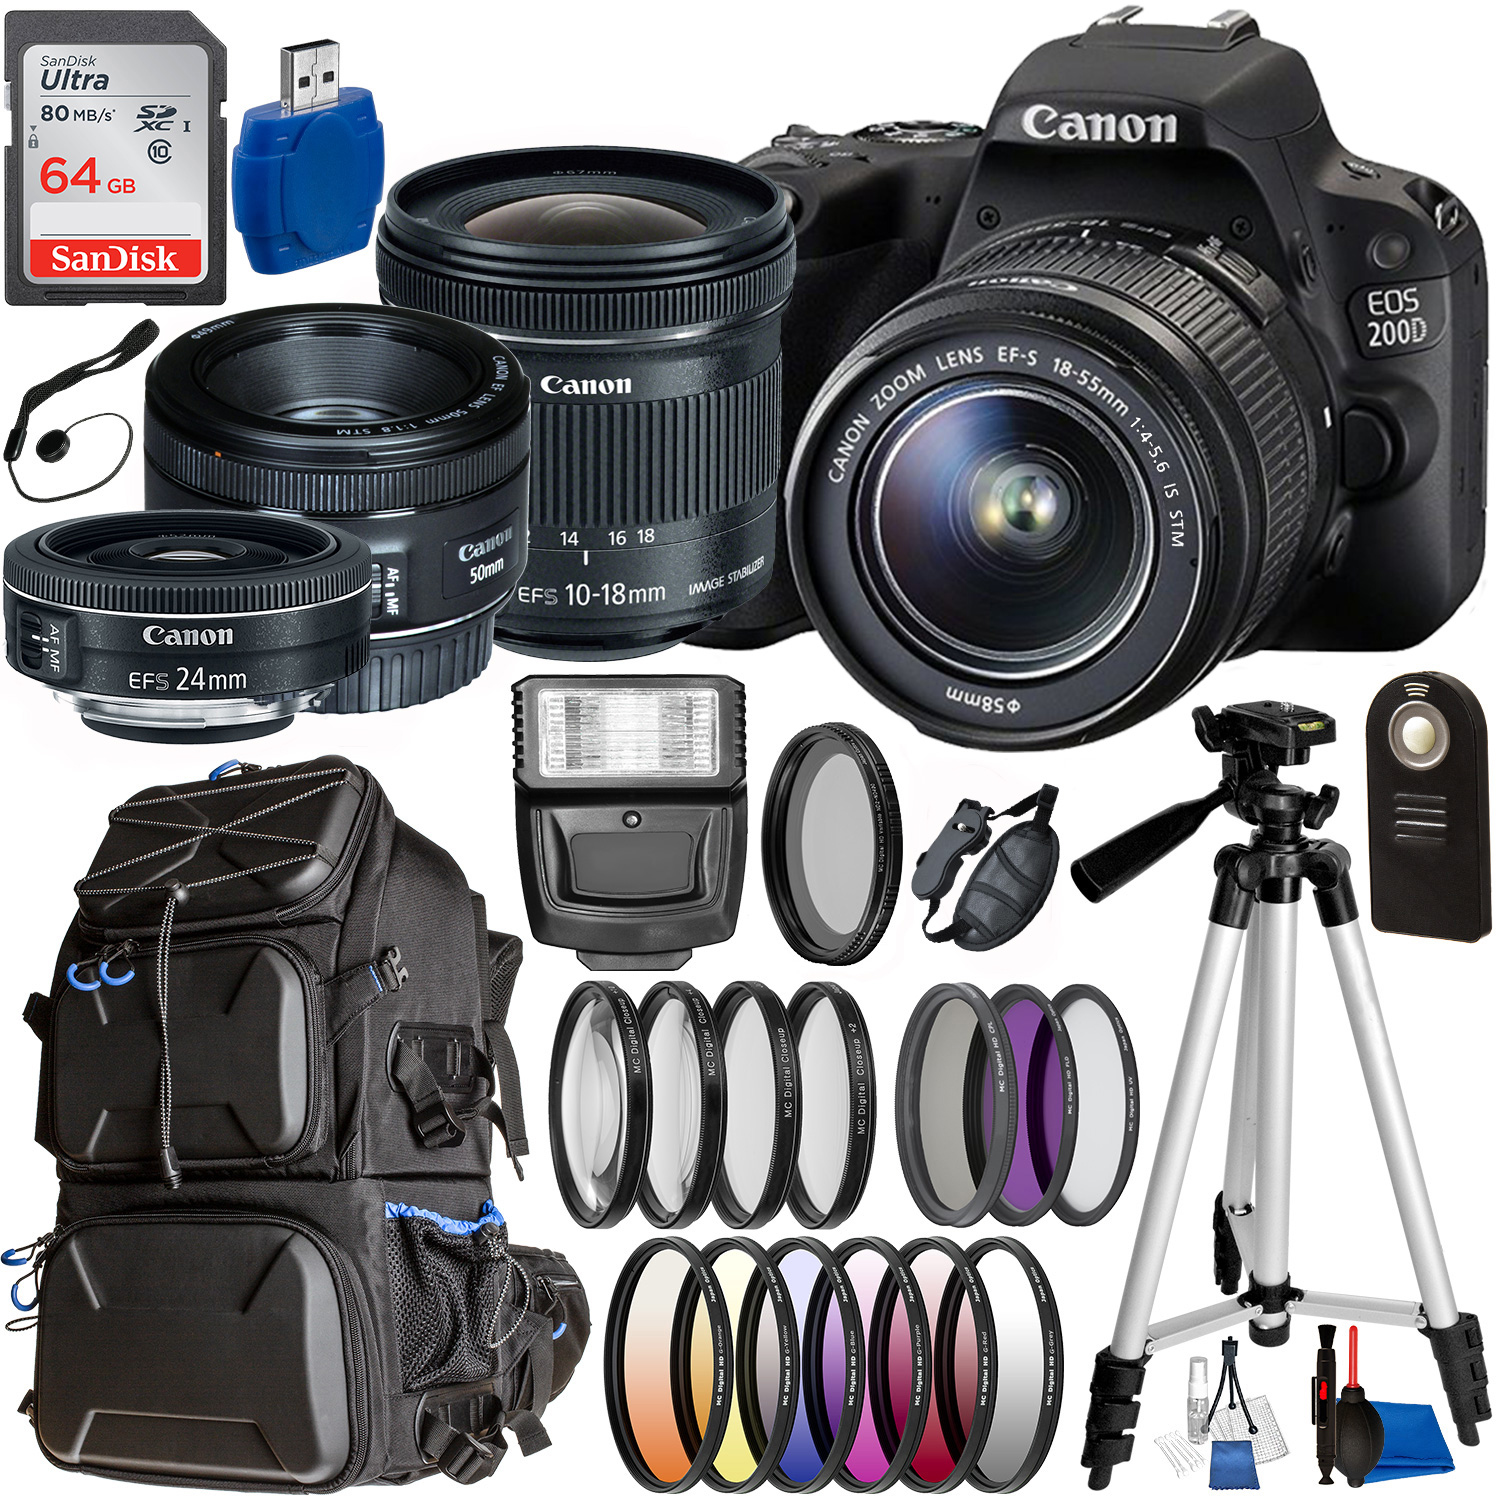 Canon EOS 200D / Rebel SL2 DSLR Camera with 18-55mm, 10-18mm, 24mm, & 50mm Canon Lenses & Essential Accessory Bundle